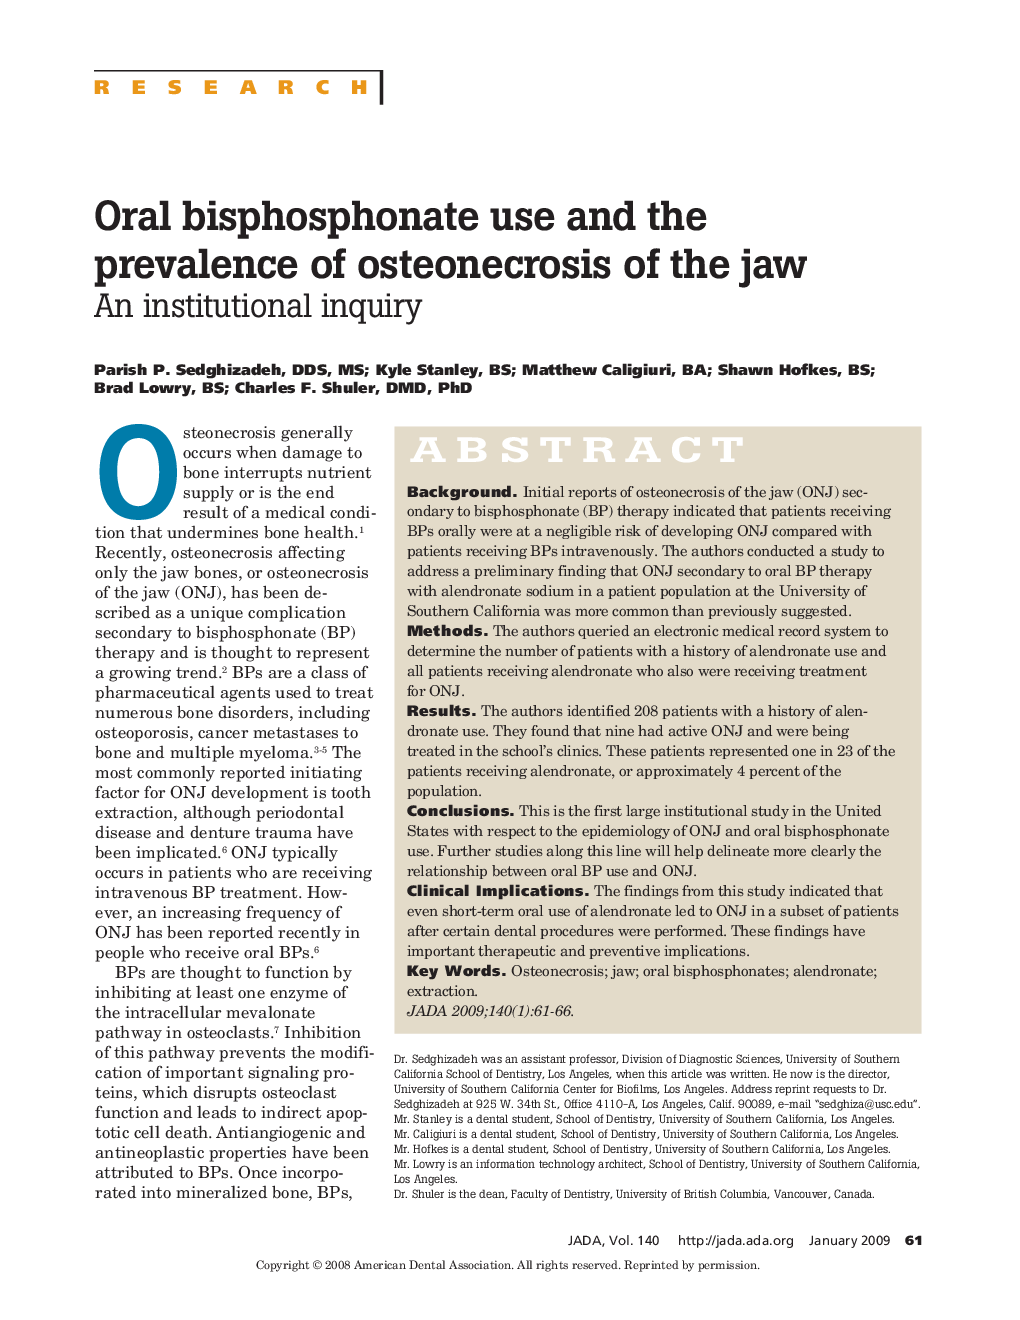 Oral bisphosphonate use and the prevalence of osteonecrosis of the jaw : An institutional inquiry